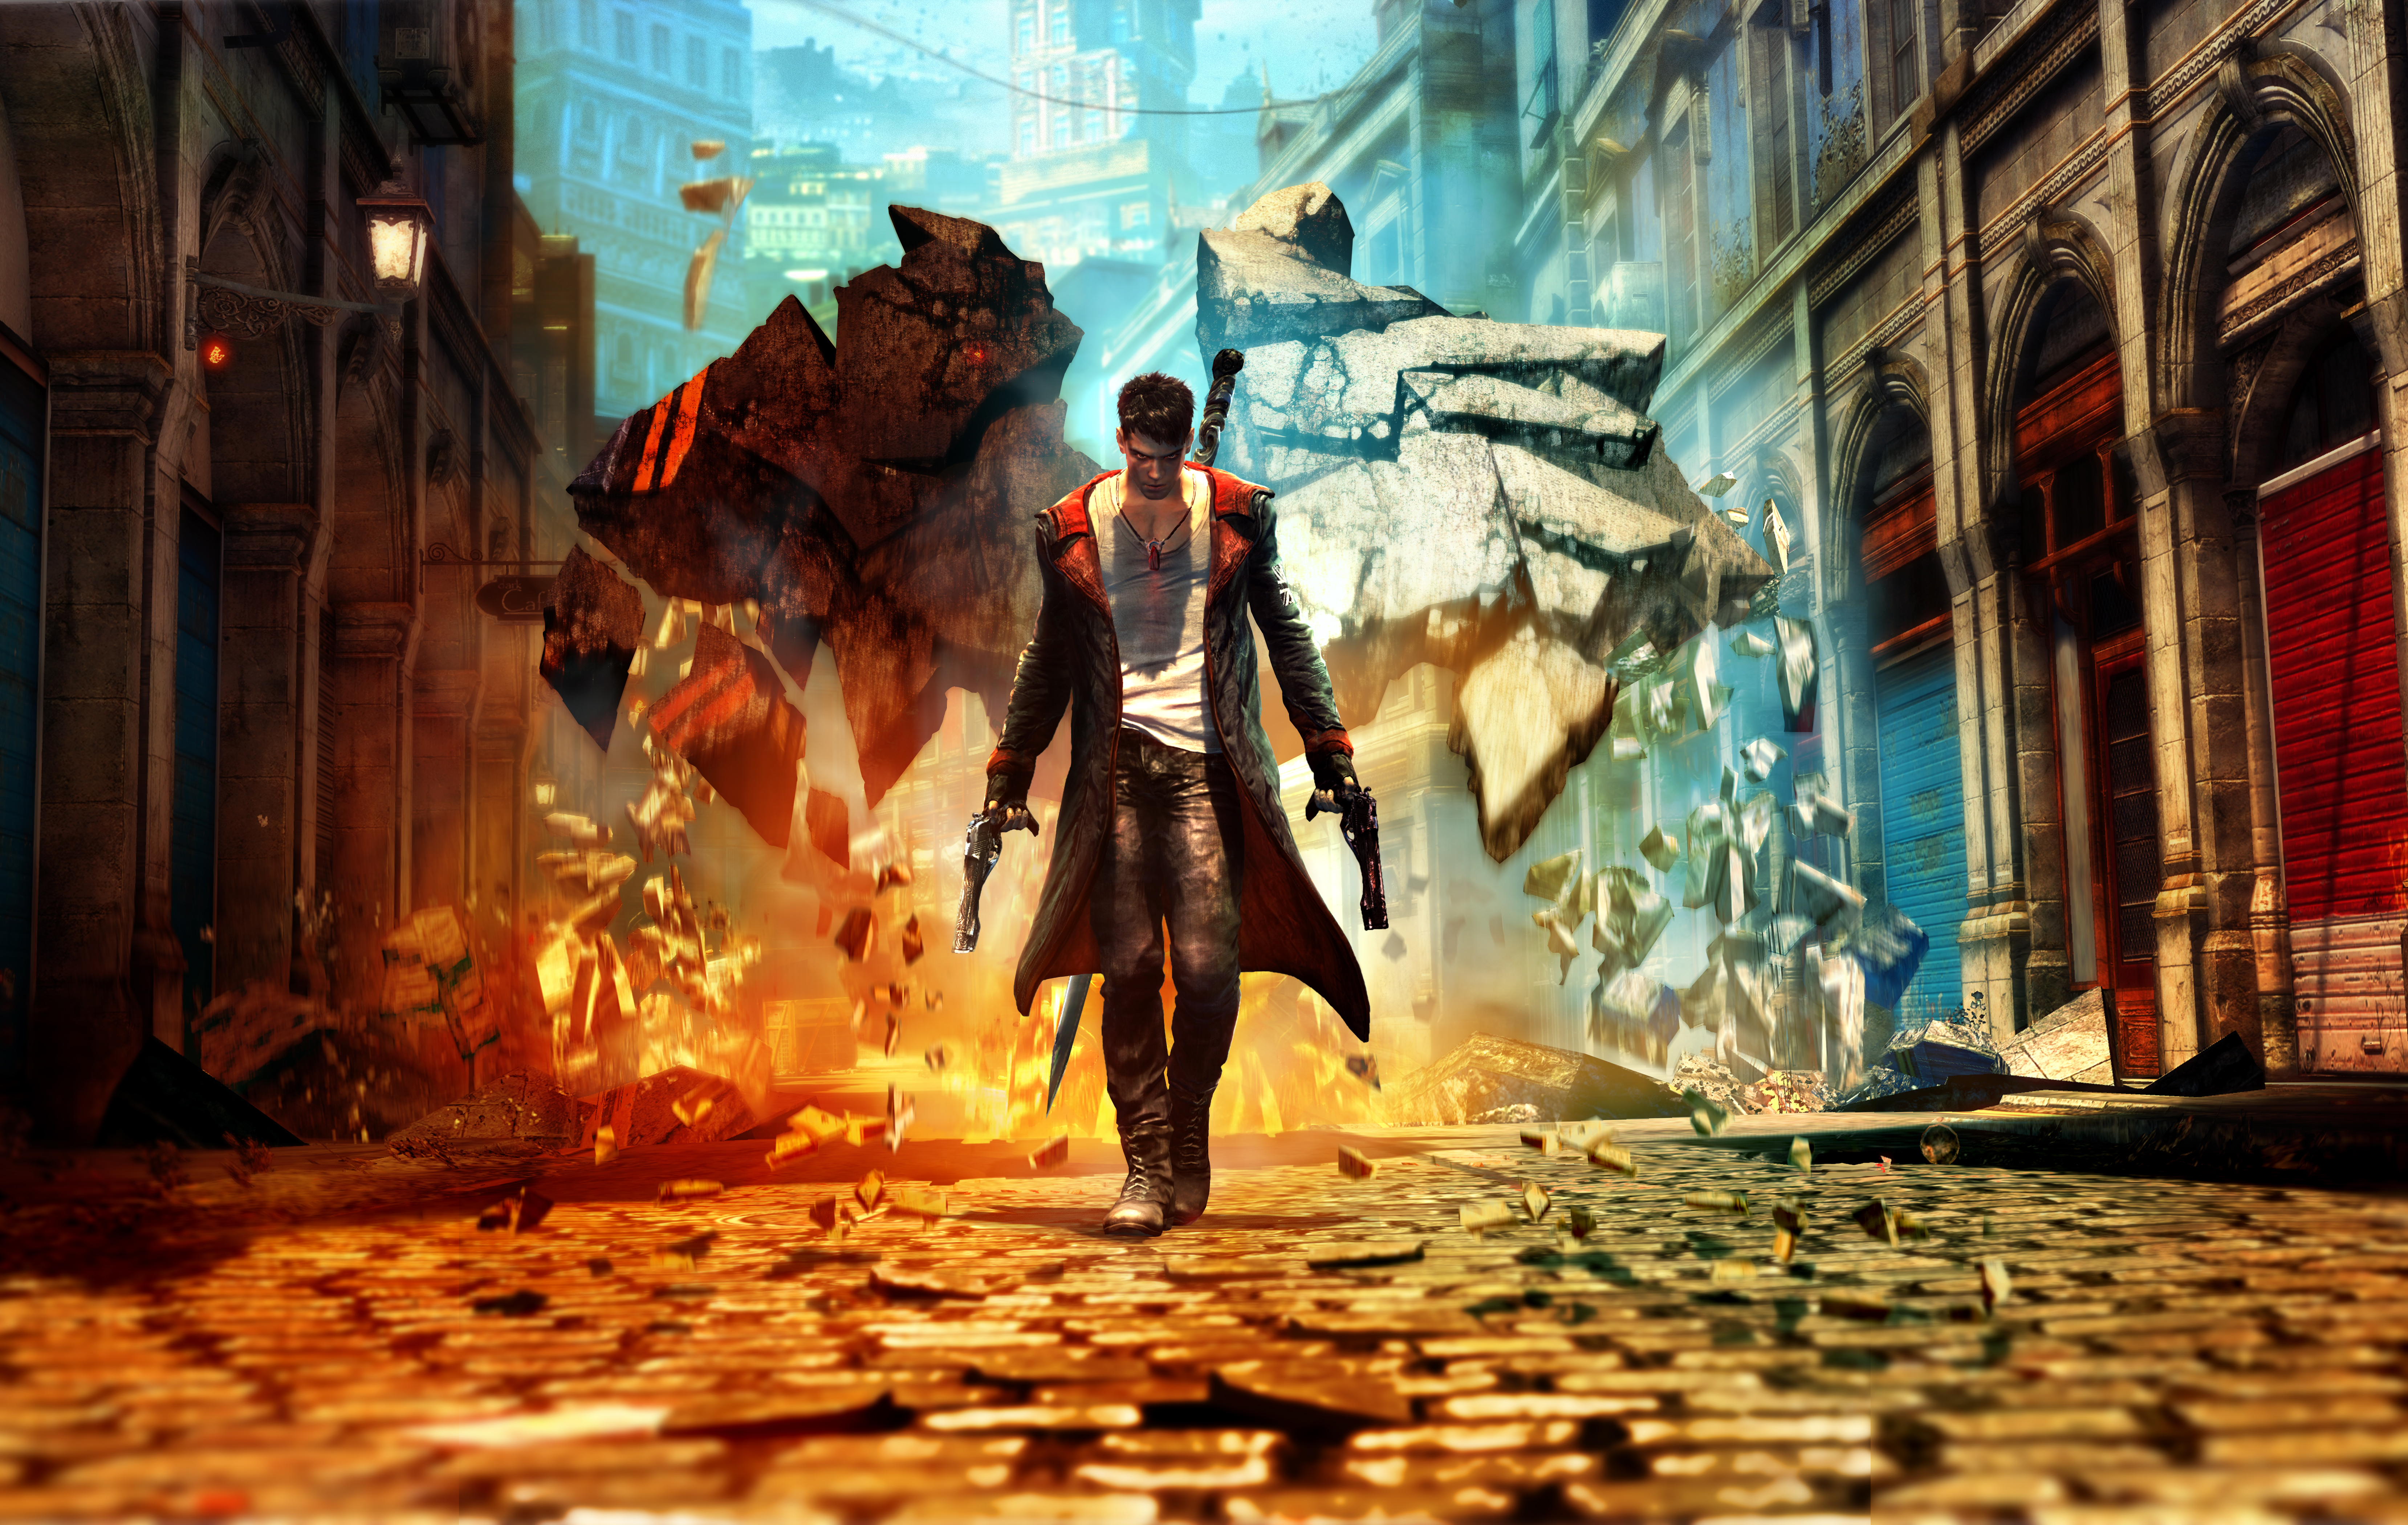 Video Game DmC: Devil May Cry HD Wallpaper | Background Image